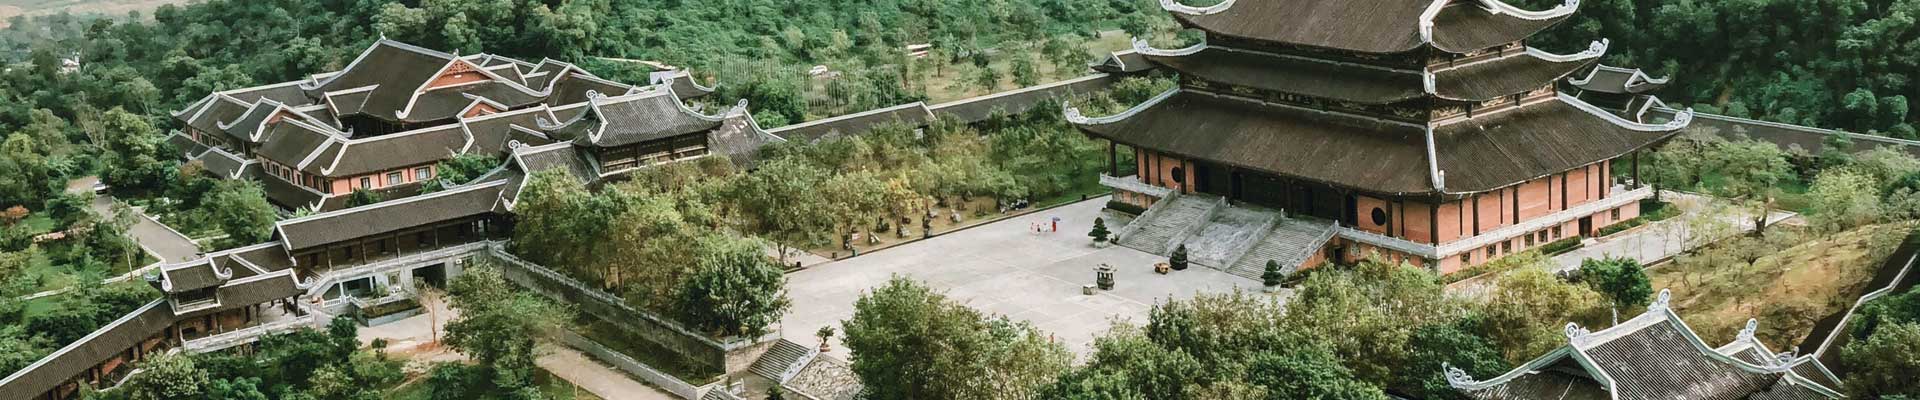 Rooftops and landscape in China